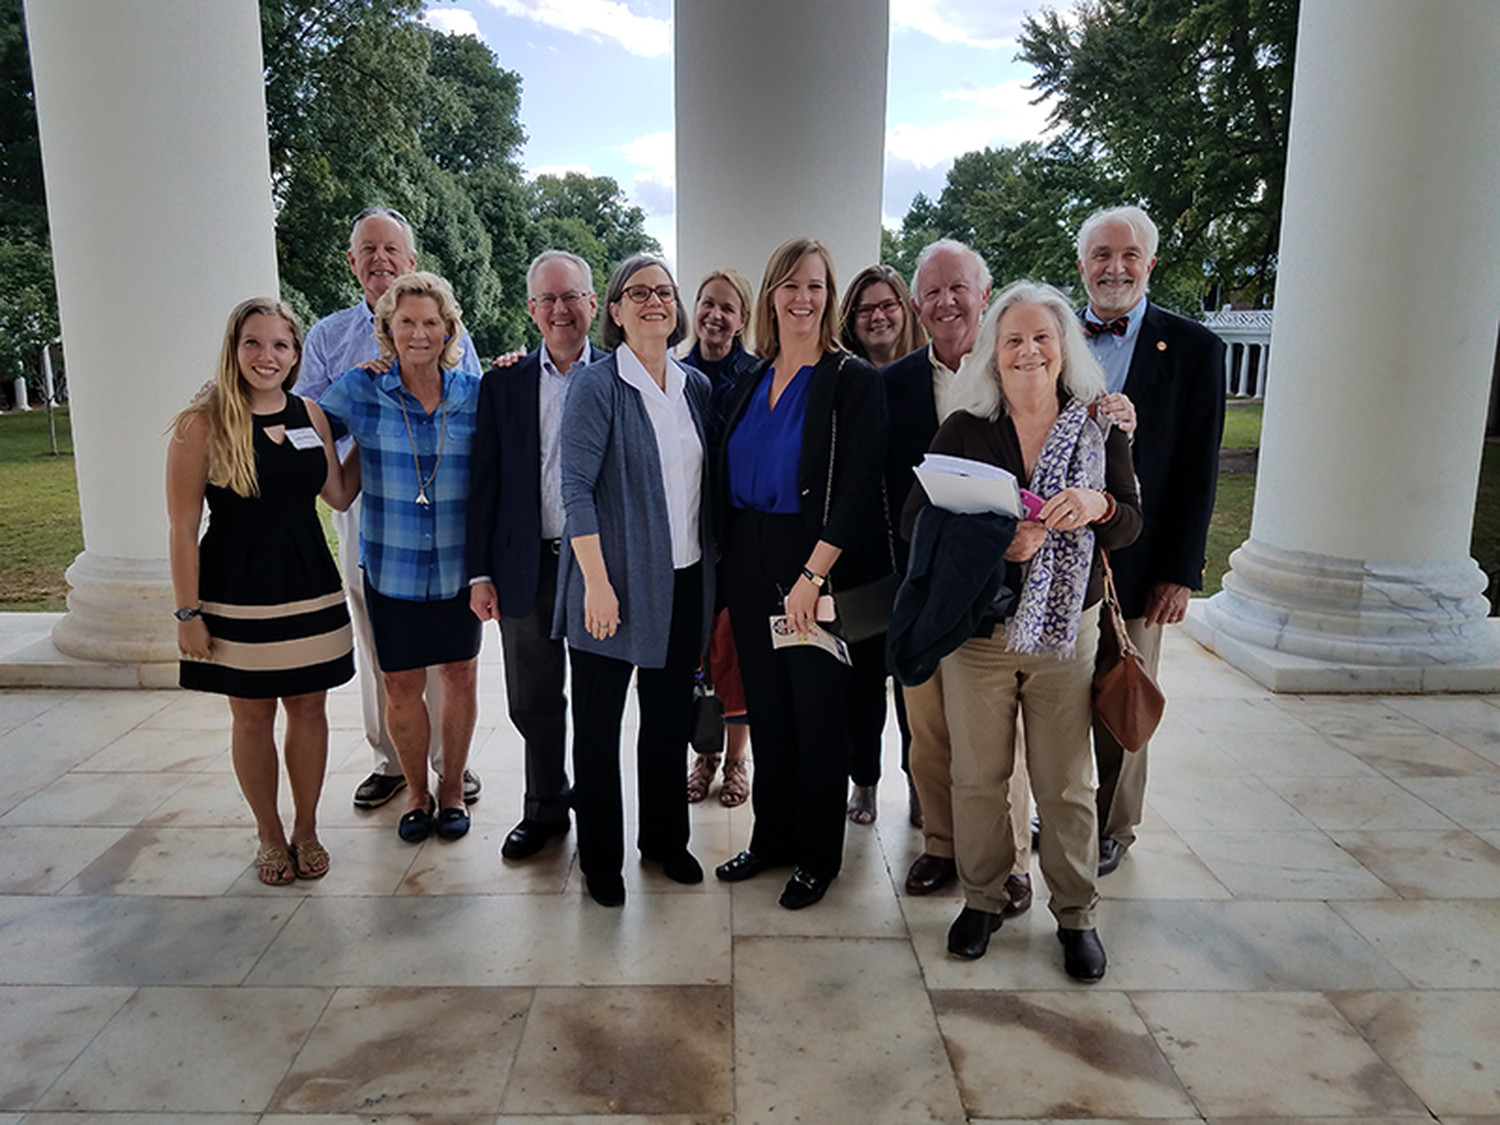 Arts Council members enjoyed a private tour of the newly-restored Rotunda and the Lawn following their fall 2017 meeting.